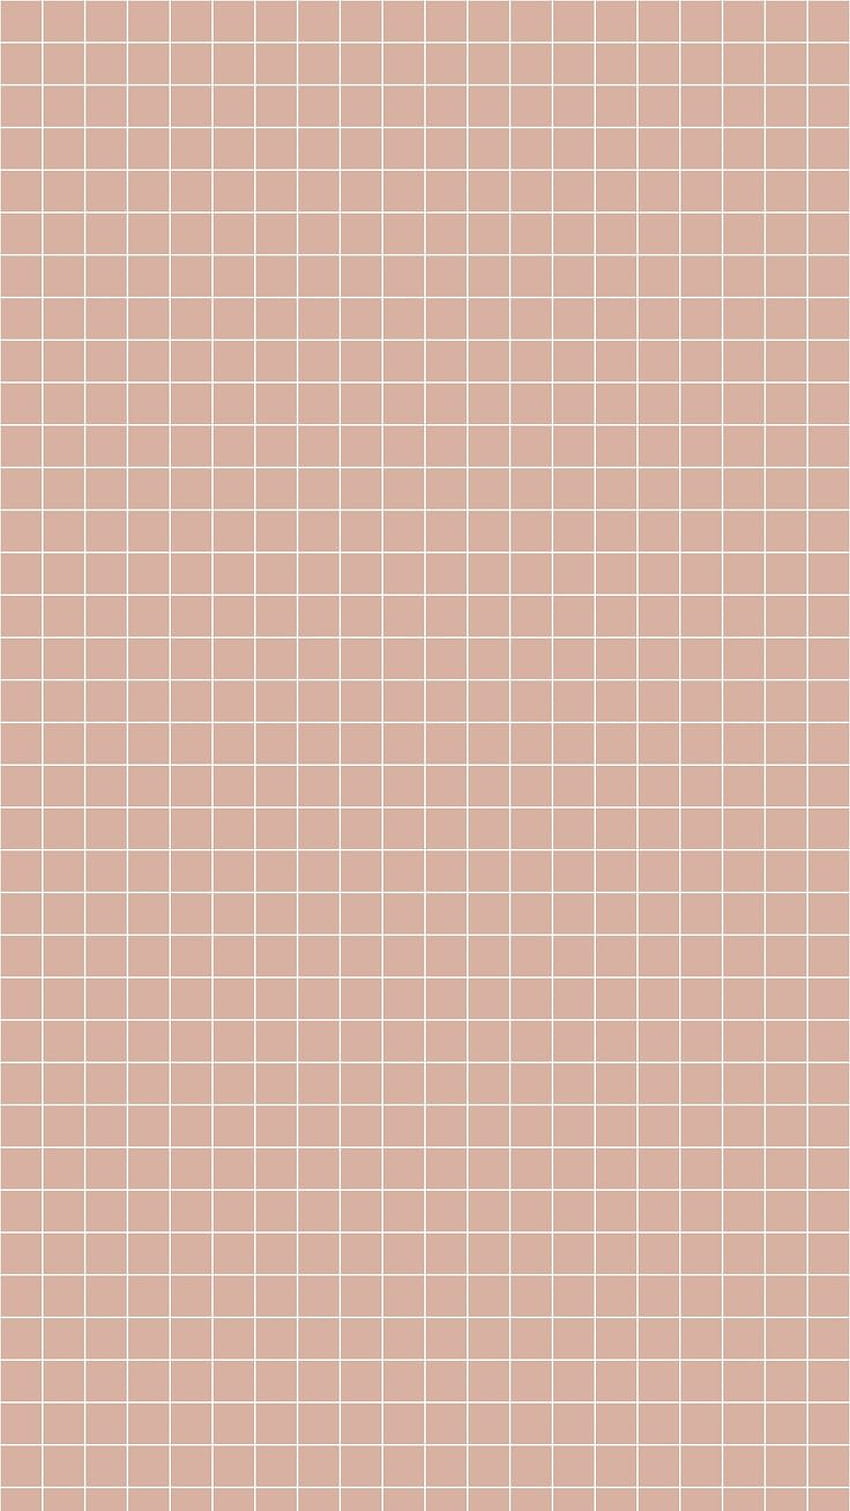 A pink and white grid pattern - Grid